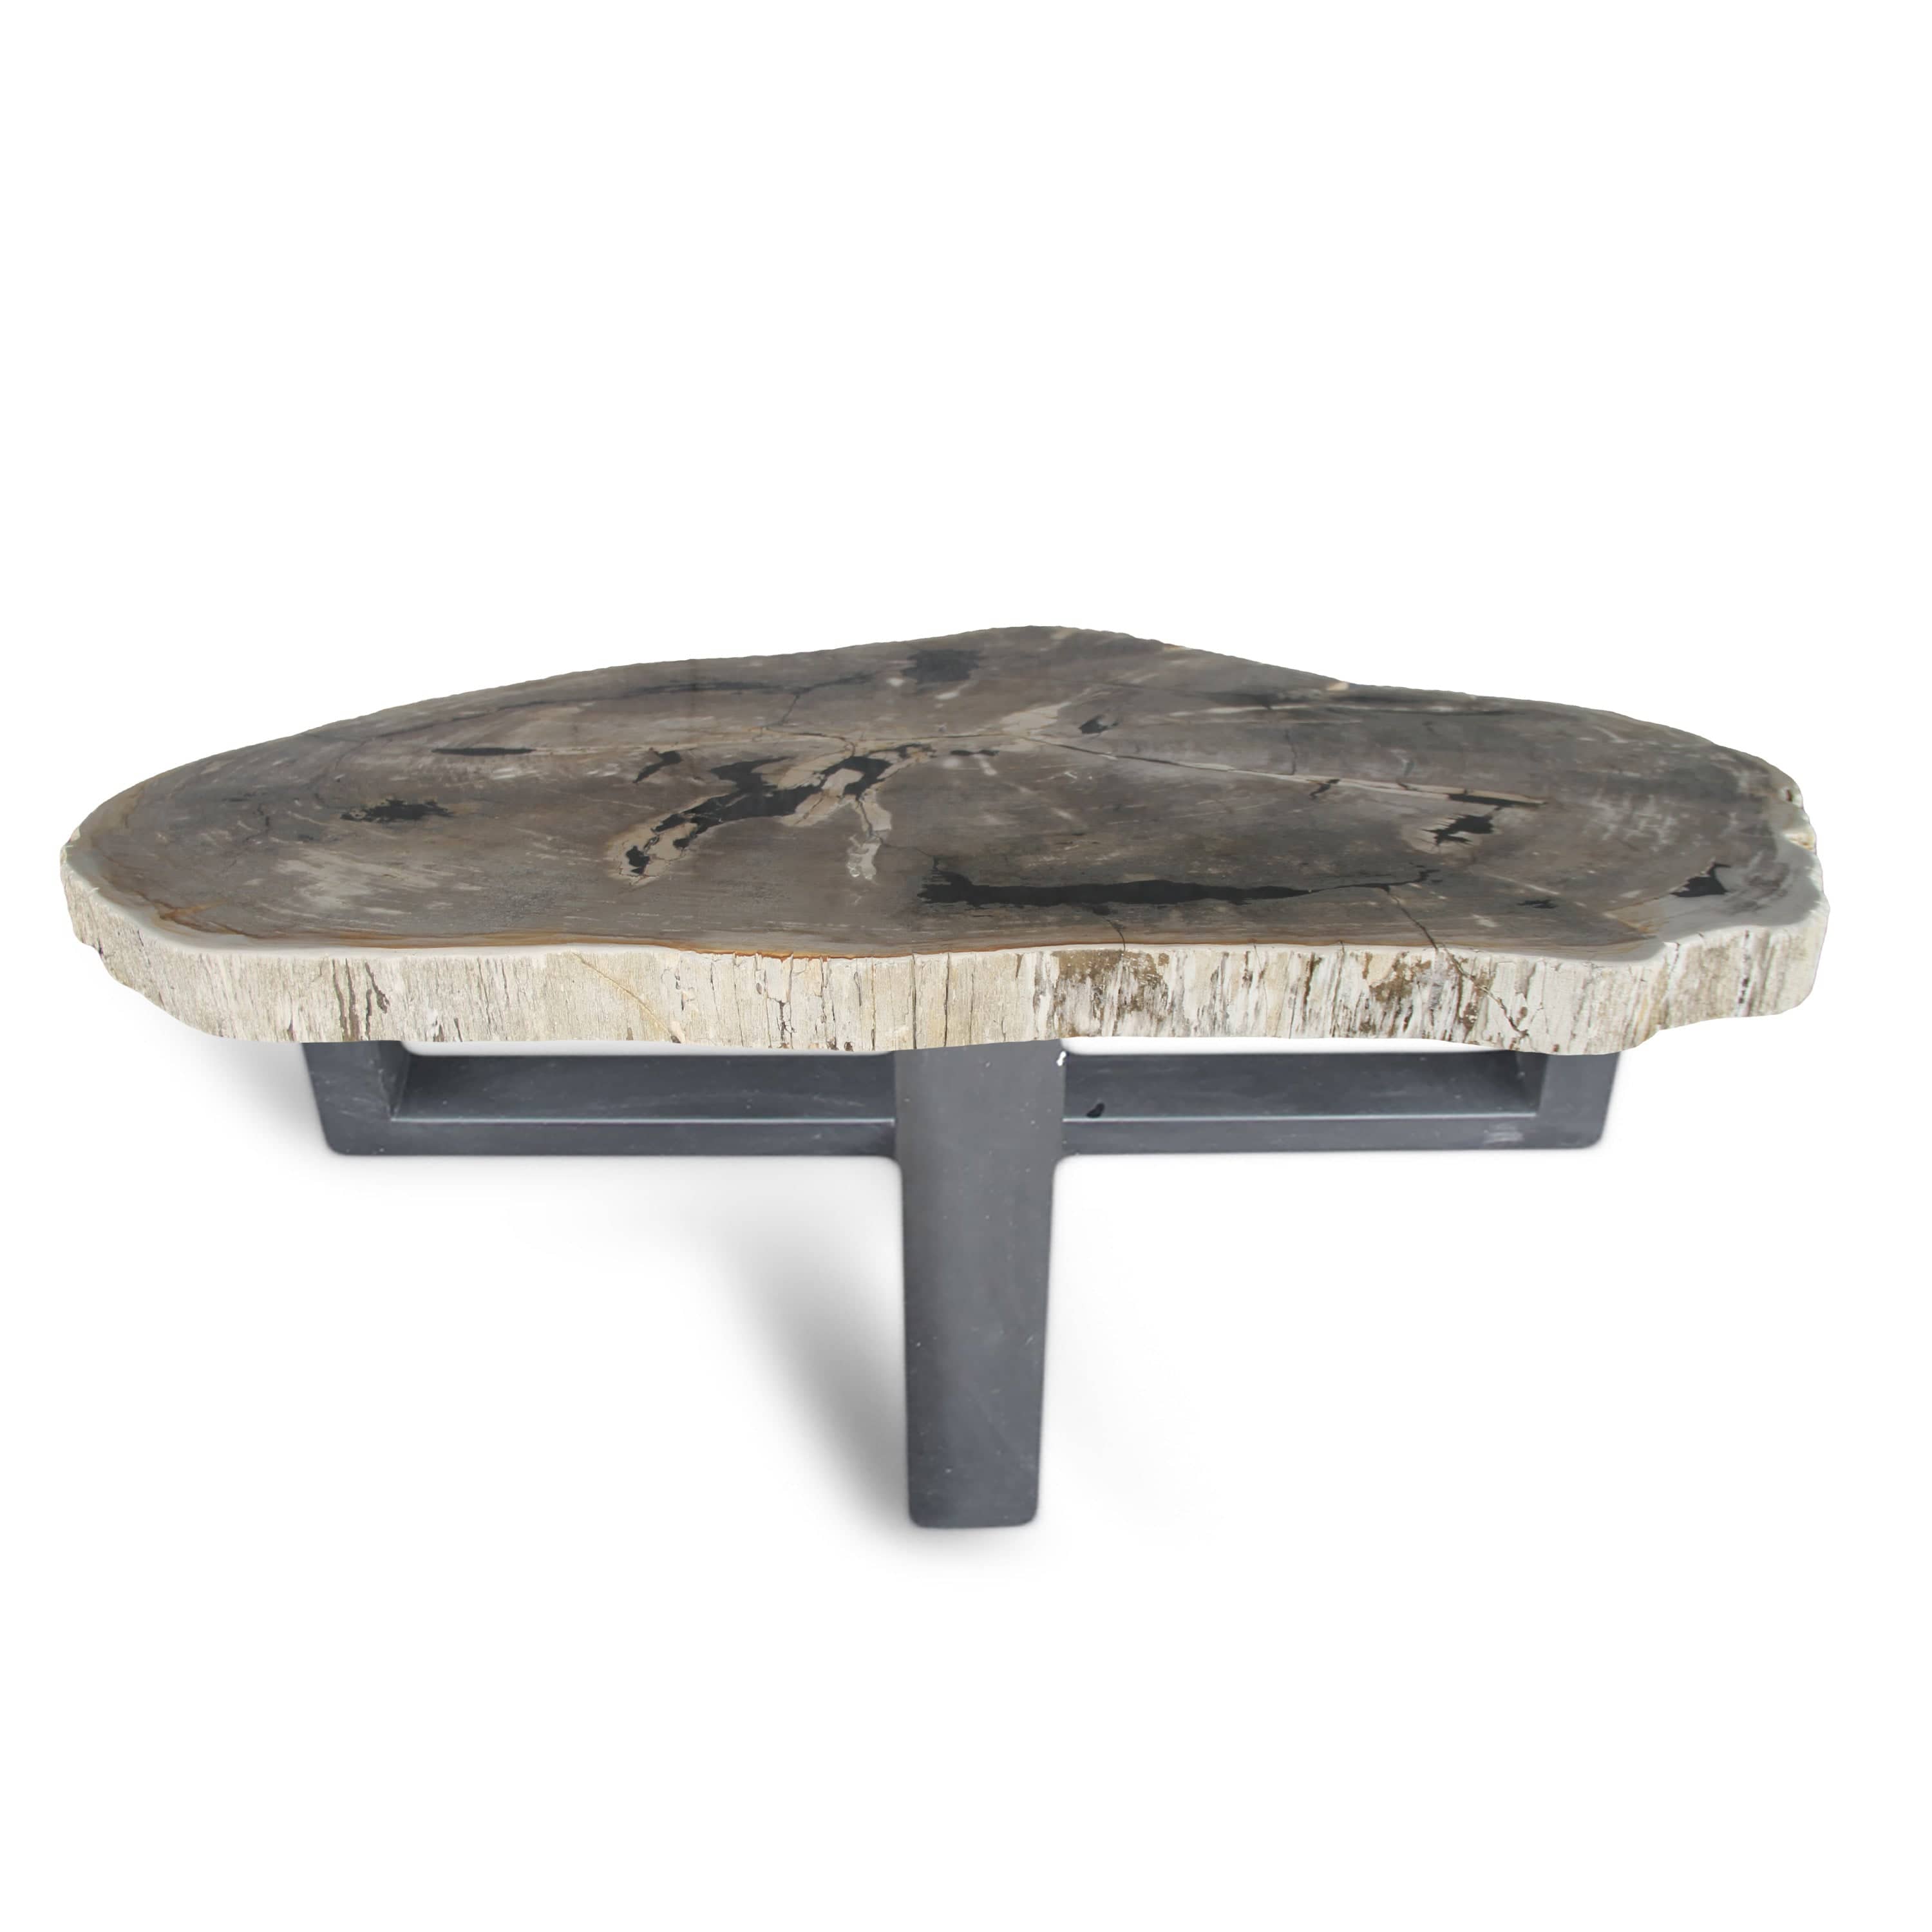 Petrified Wood Round Slab Coffee Table from Indonesia - 61" / 466 lbs